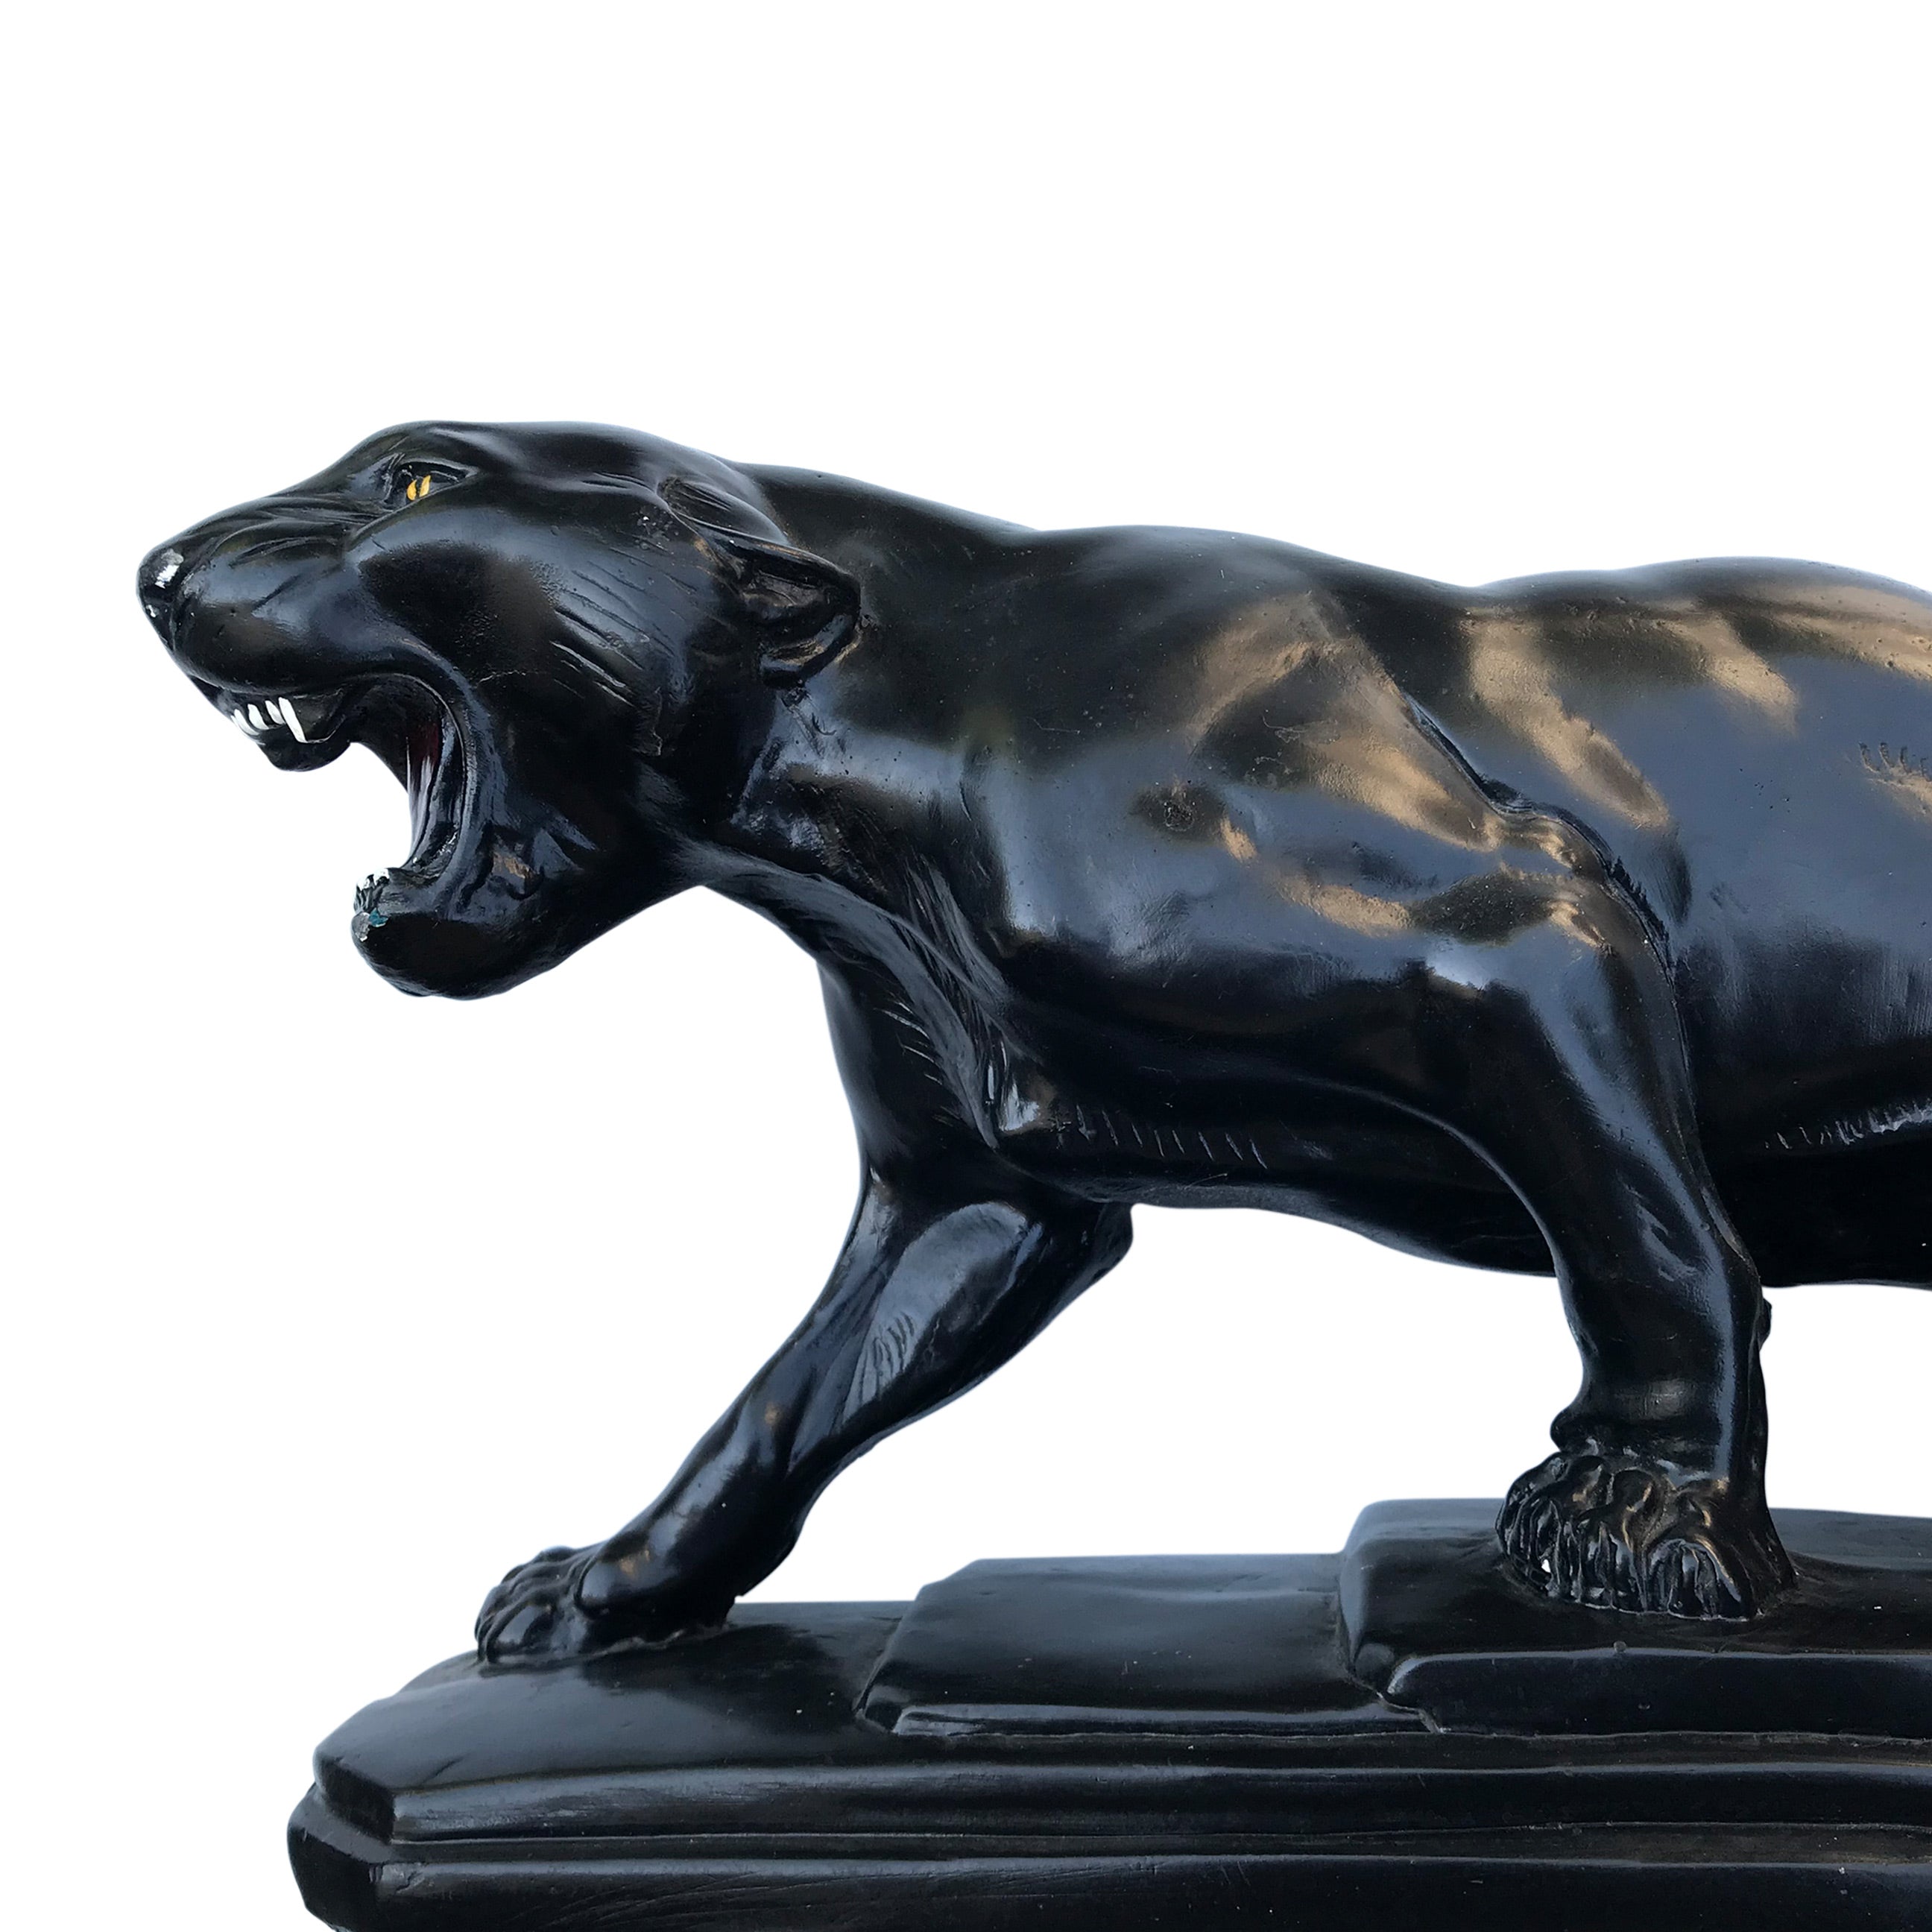 Vintage 1930's Deco Chalkware Black Panther. Find this and other Beautiful Vintage items for you home at Intovintage.co.uk.